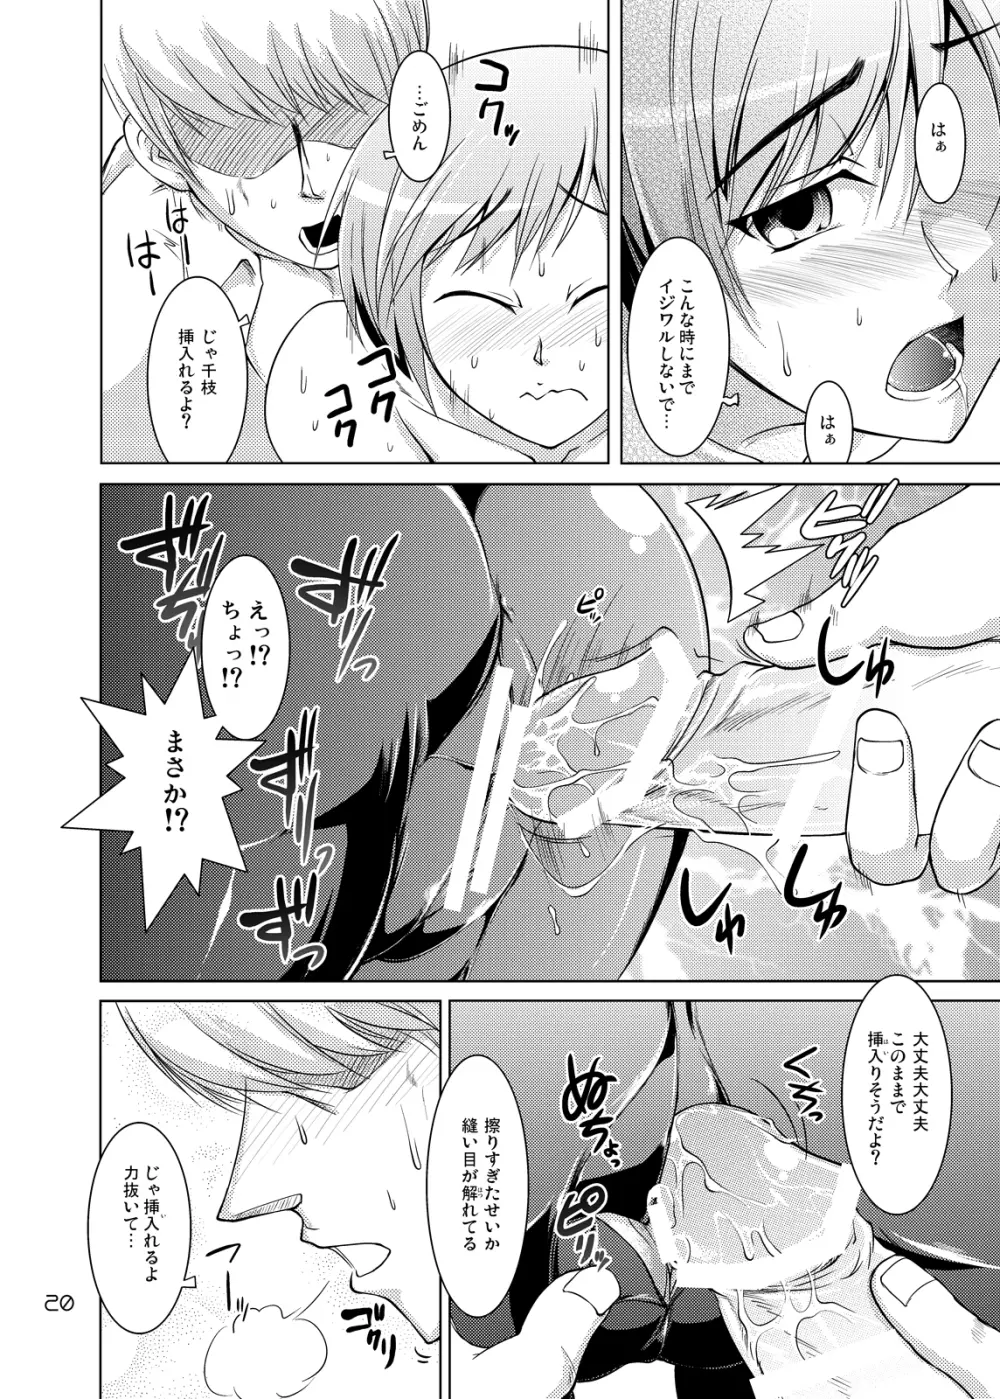 S4 spats forever - page19